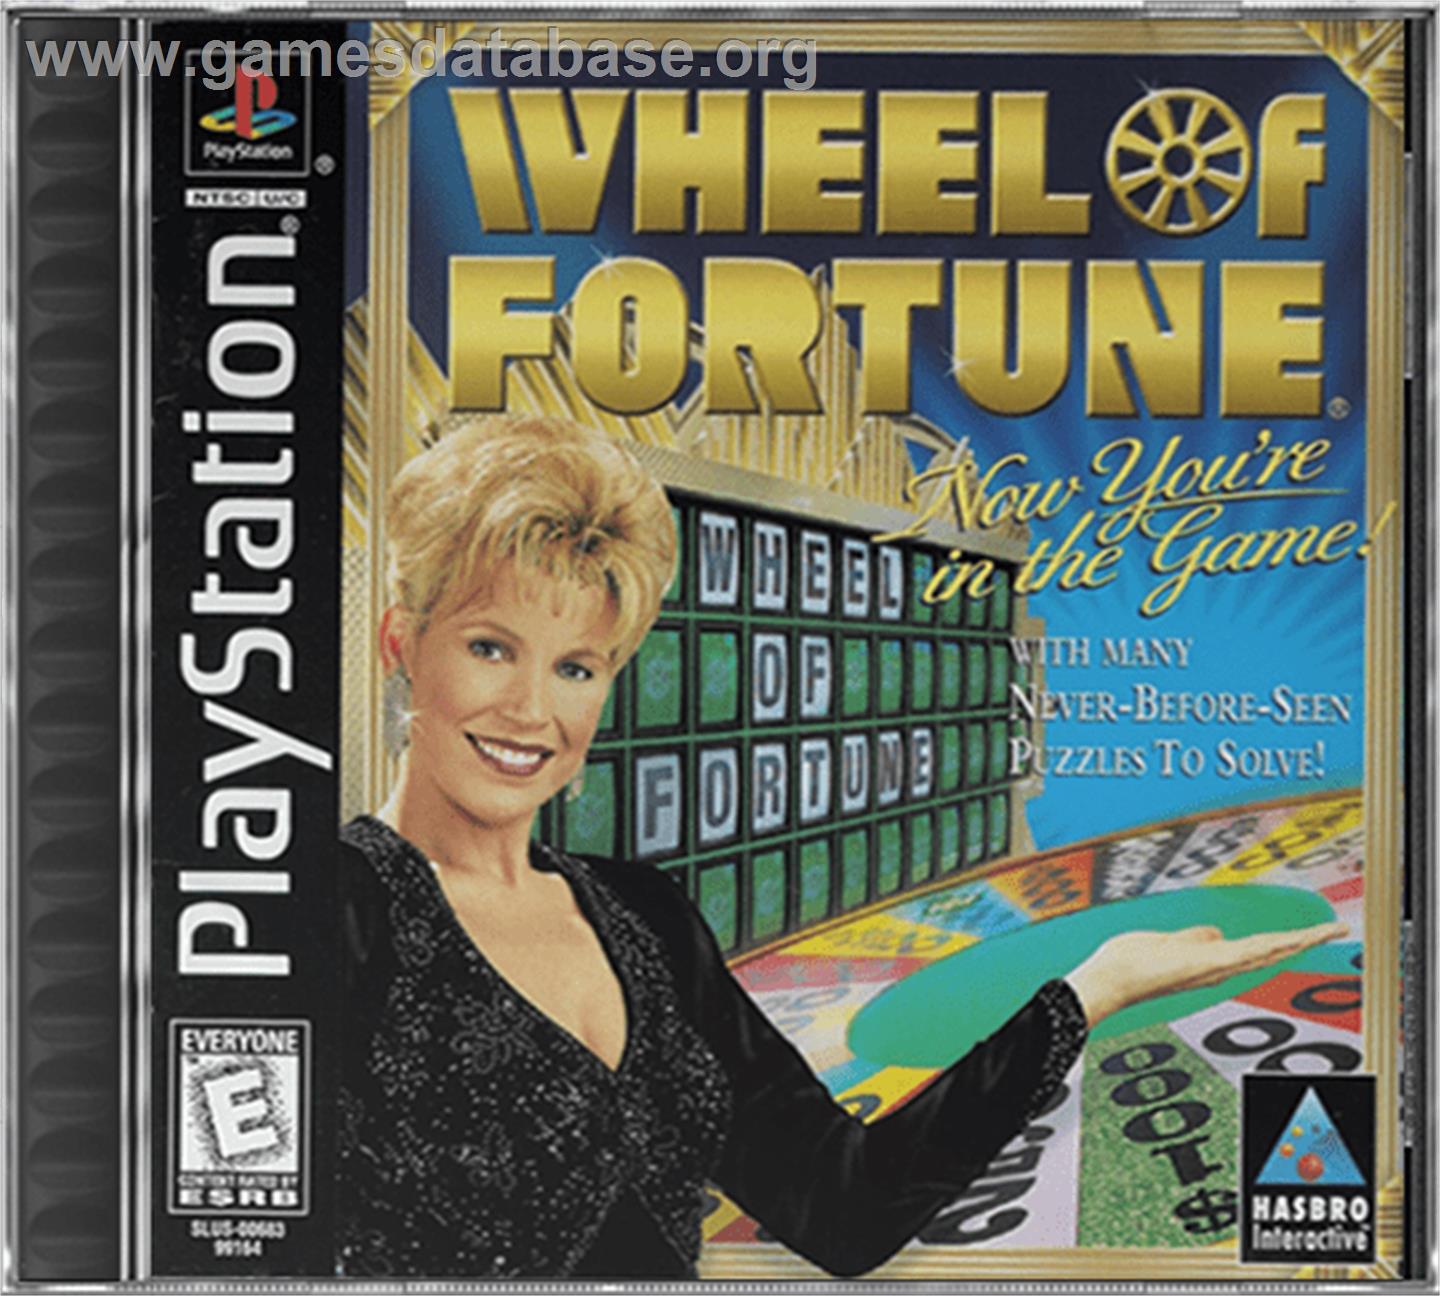 Wheel of Fortune: 2nd Edition - Sony Playstation - Artwork - Box